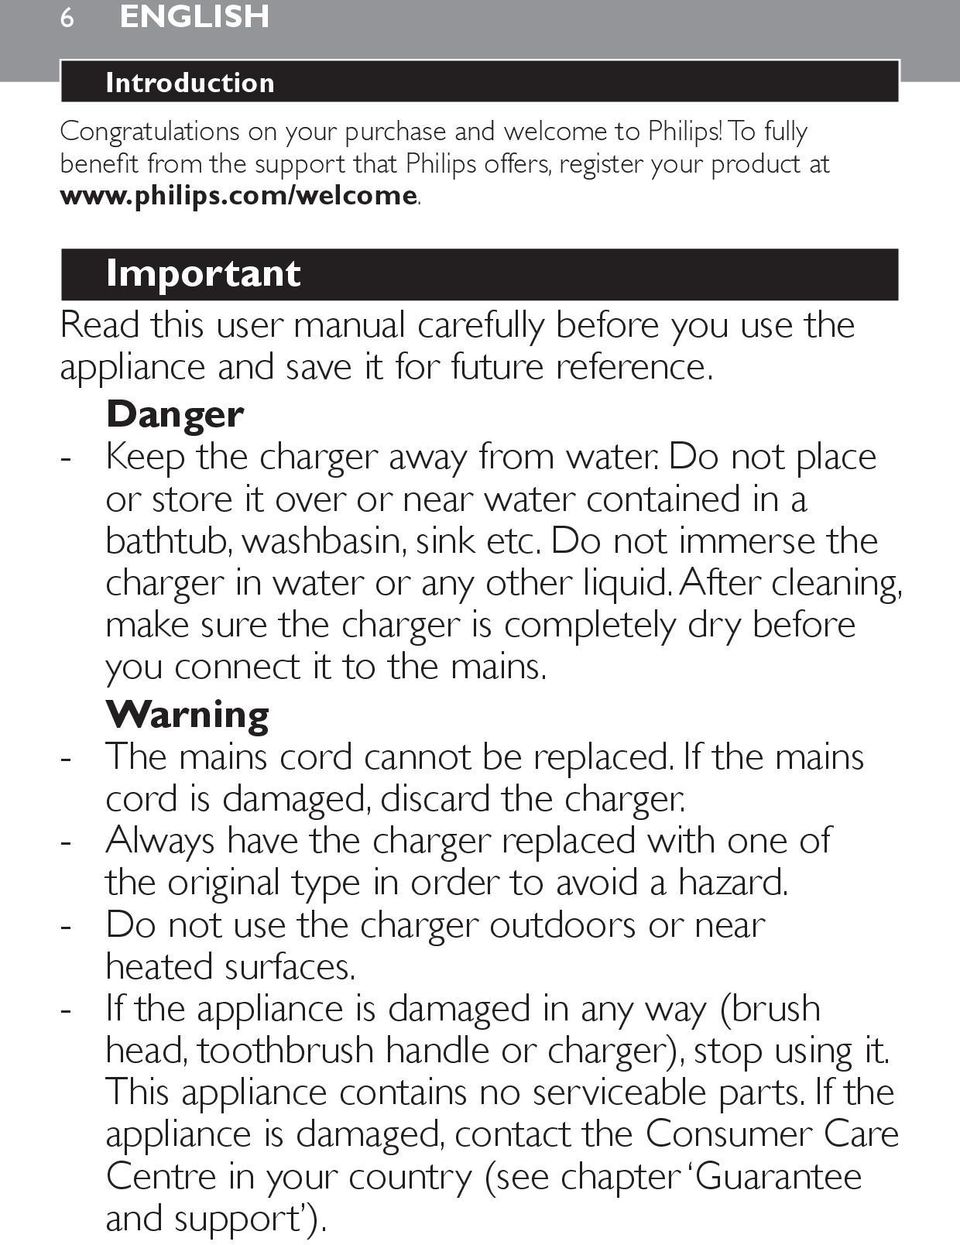 Do not place or store it over or near water contained in a bathtub, washbasin, sink etc. Do not immerse the charger in water or any other liquid.